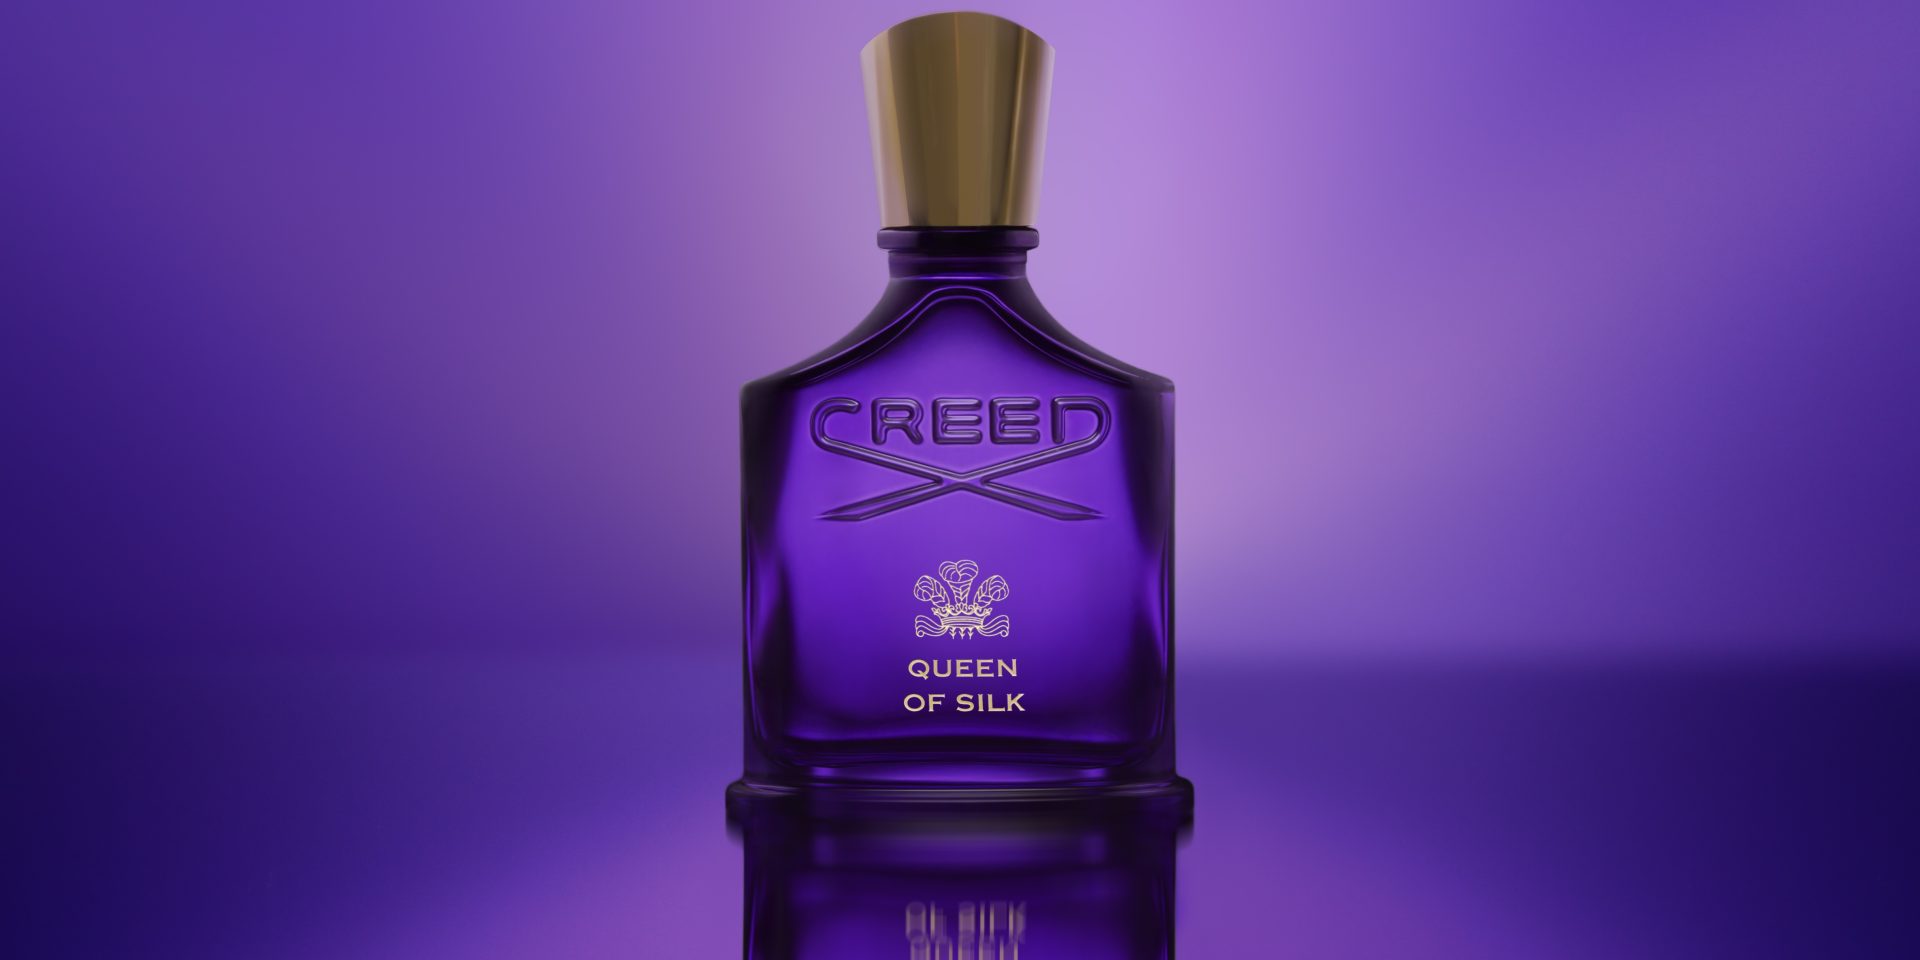 Her majesty: новый аромат от Creed — Queen of Silk